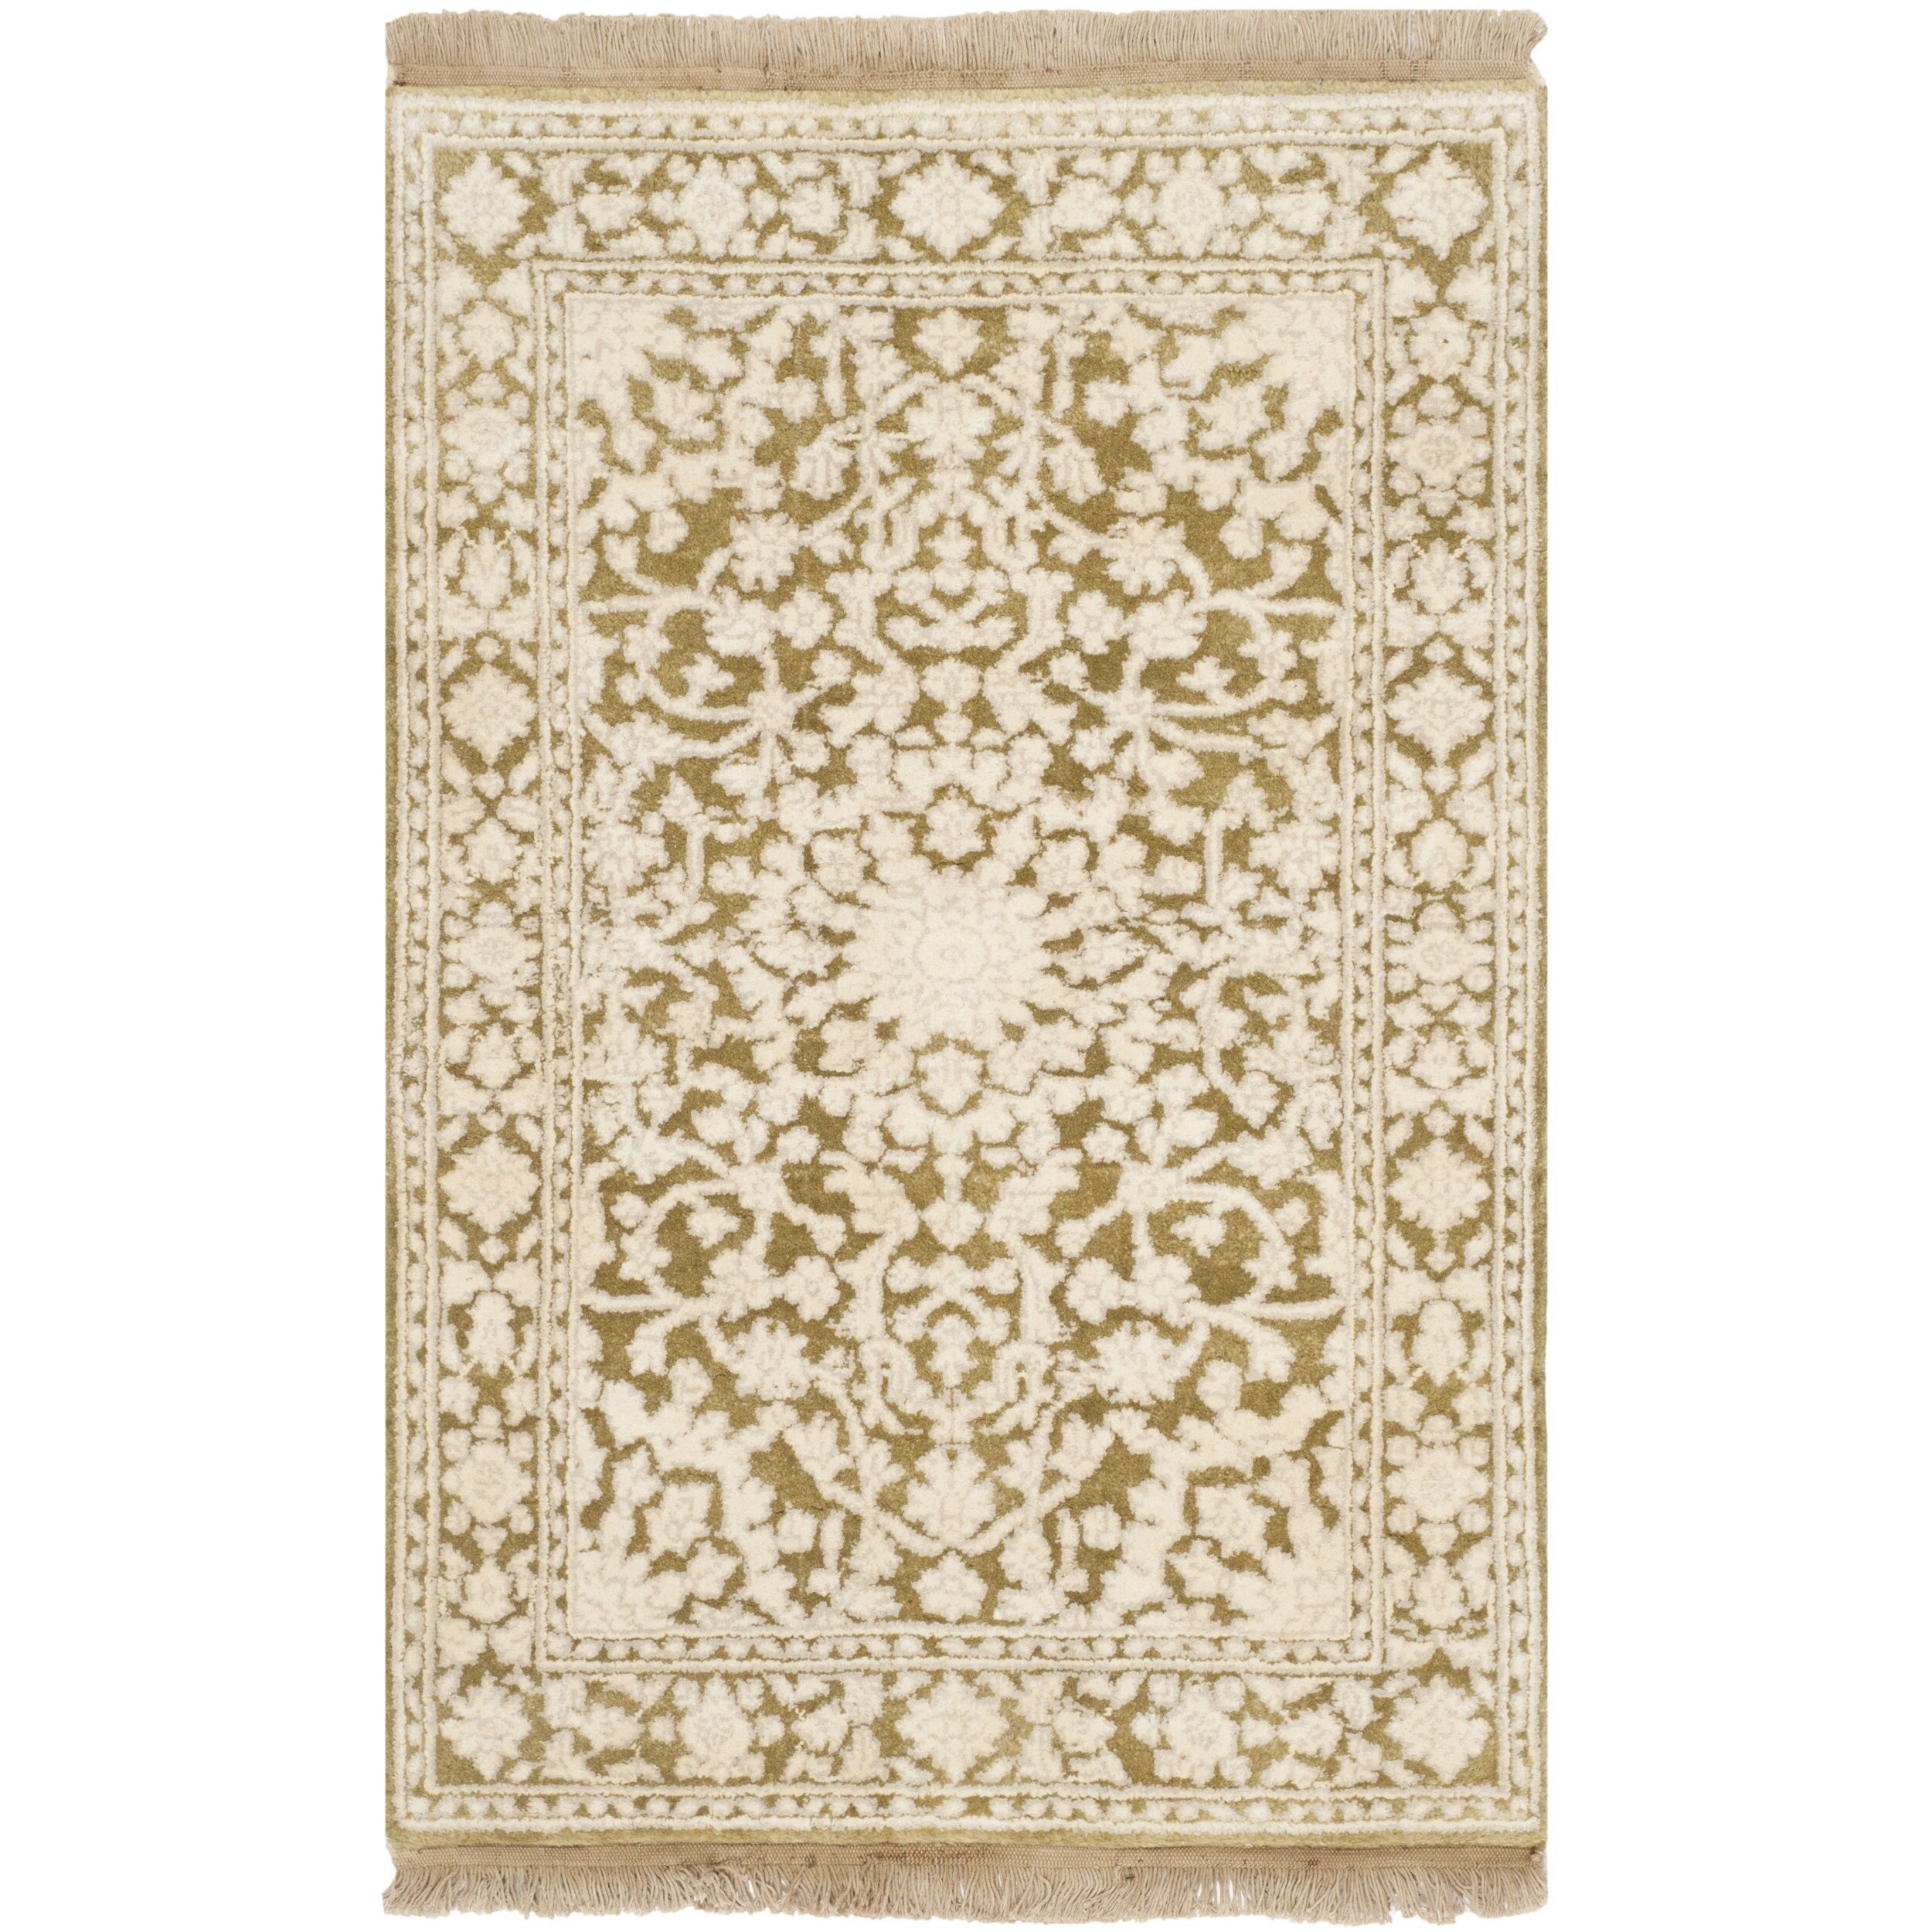 Safavieh Hand knotted Ganges River Ivory/ Green Wool Rug (3 X 5)